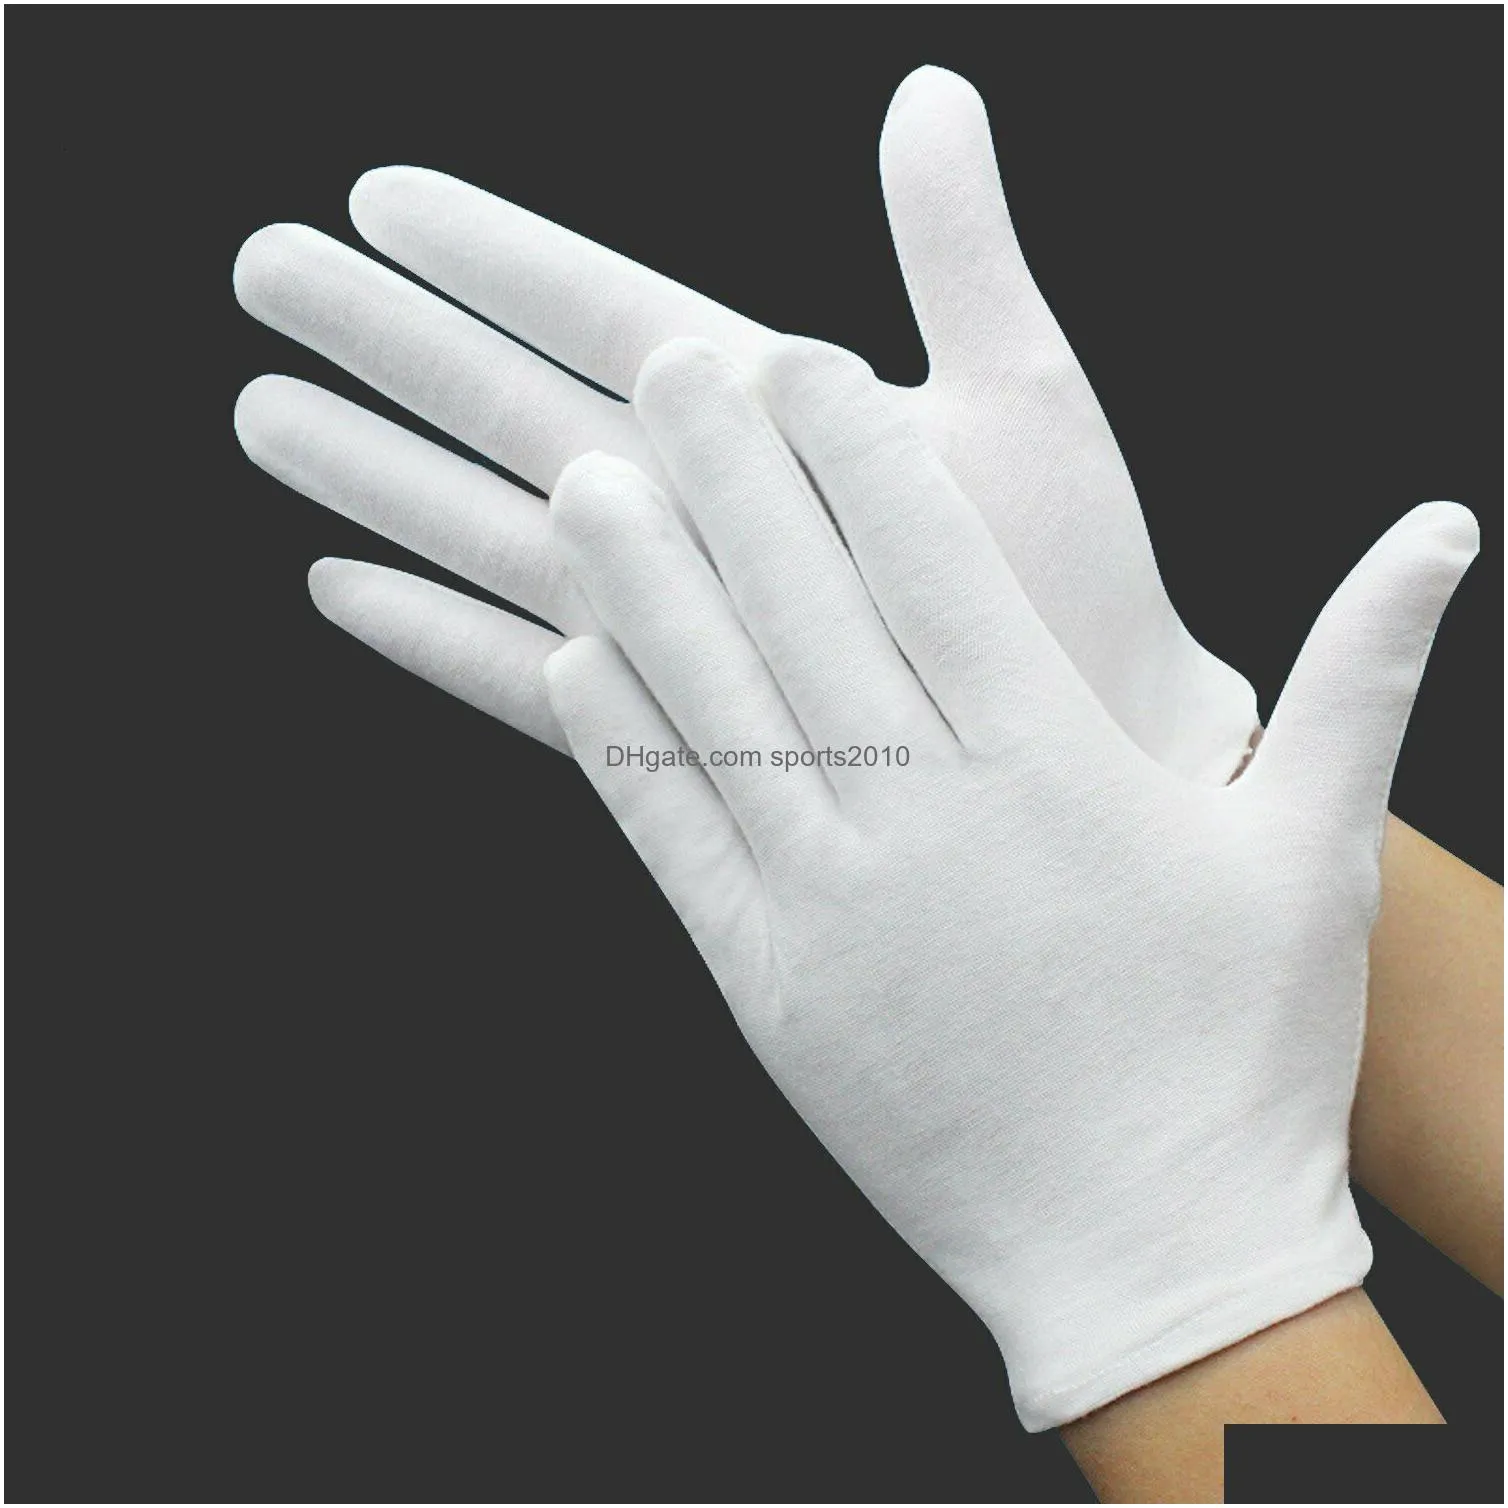 cleaning gloves 12 pairs white cotton for dry hands moisturizing eczema inspection work serving washable stretchable cloth 230809